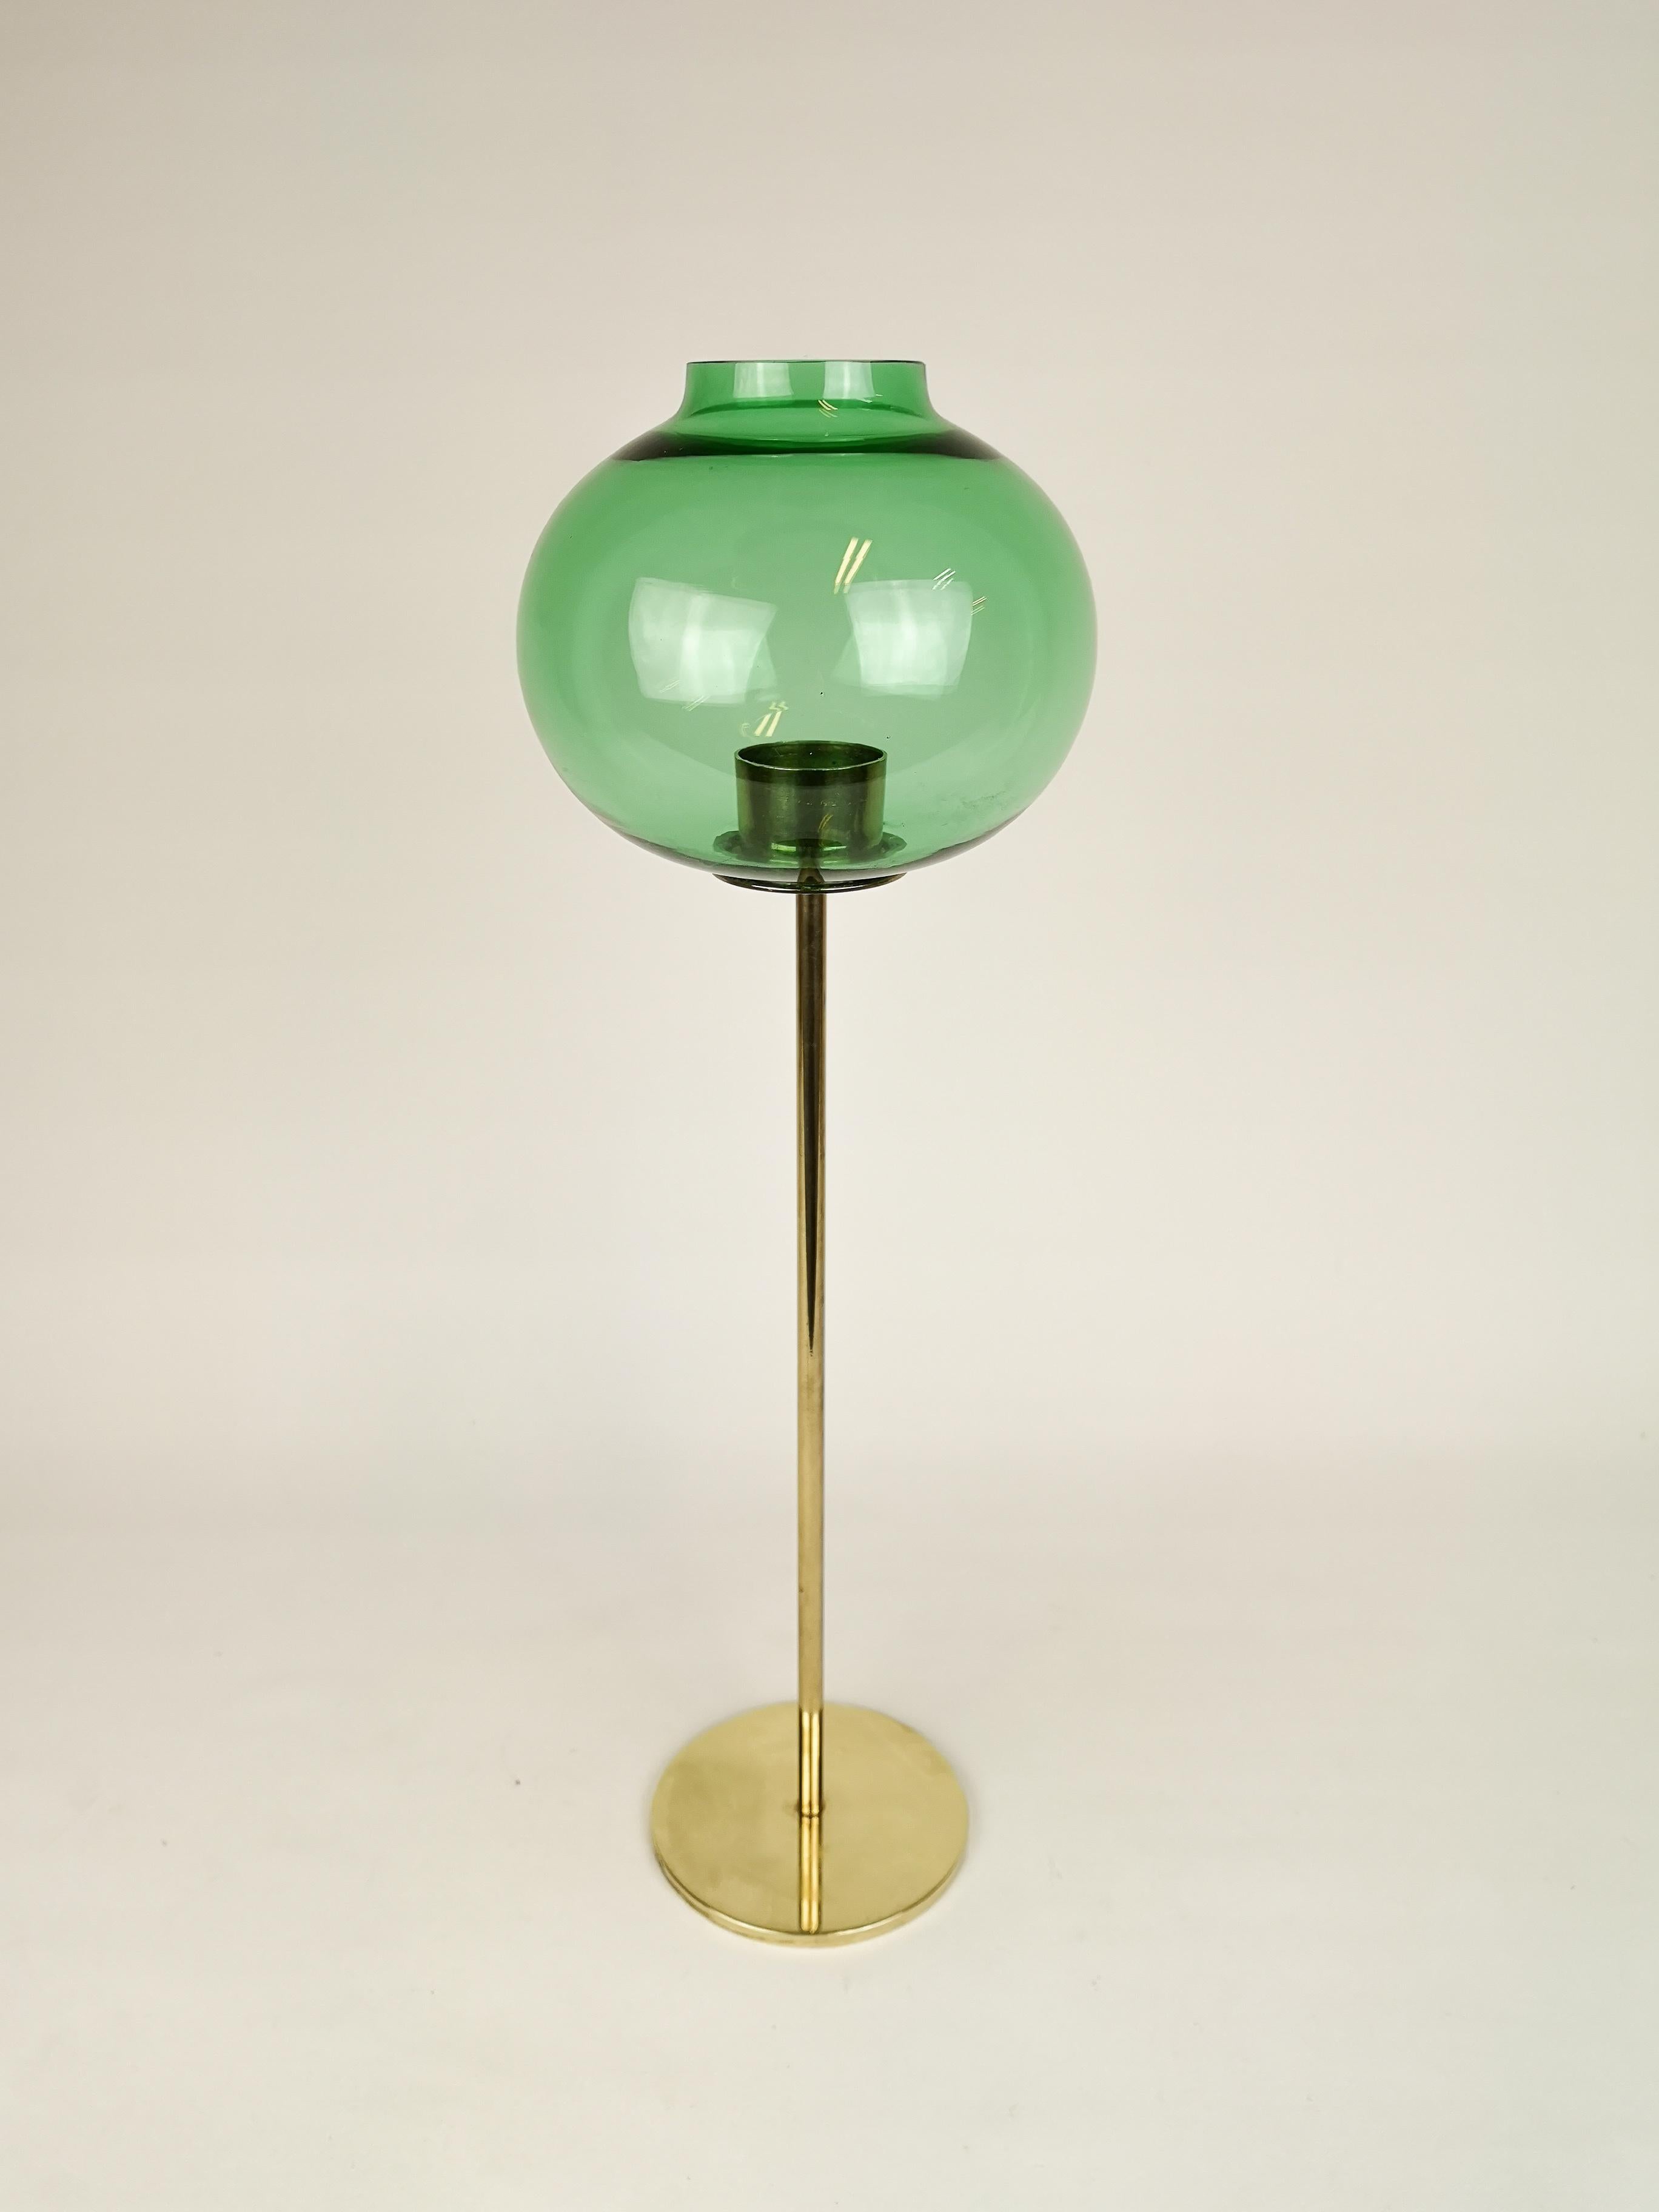 This candleholder was made in Sweden, 1960s and designed by Hans-Agne Jakobsson. It’s in brass and the top is made out of greenglass. 

It’s in good condition. The glass has a little chip around the opening, this is not visible when it’s on the